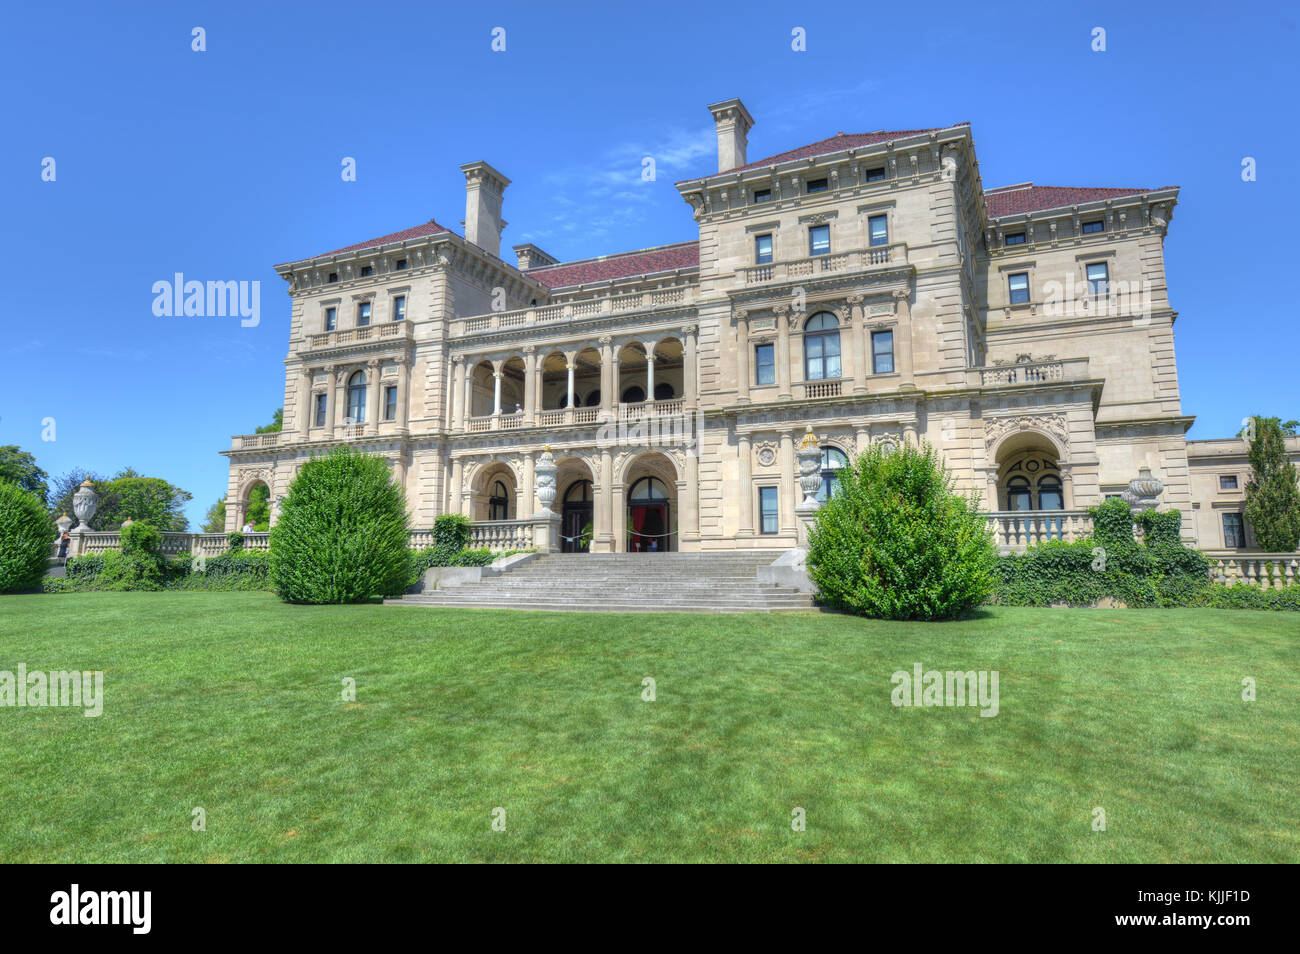 NEWPORT, RHODE ISLAND - AUGUST 8, 2013: The Breakers Mansion - a national historic landmark, built by Cornelius Vanderbilt of the Gilded Age, as seen  Stock Photo